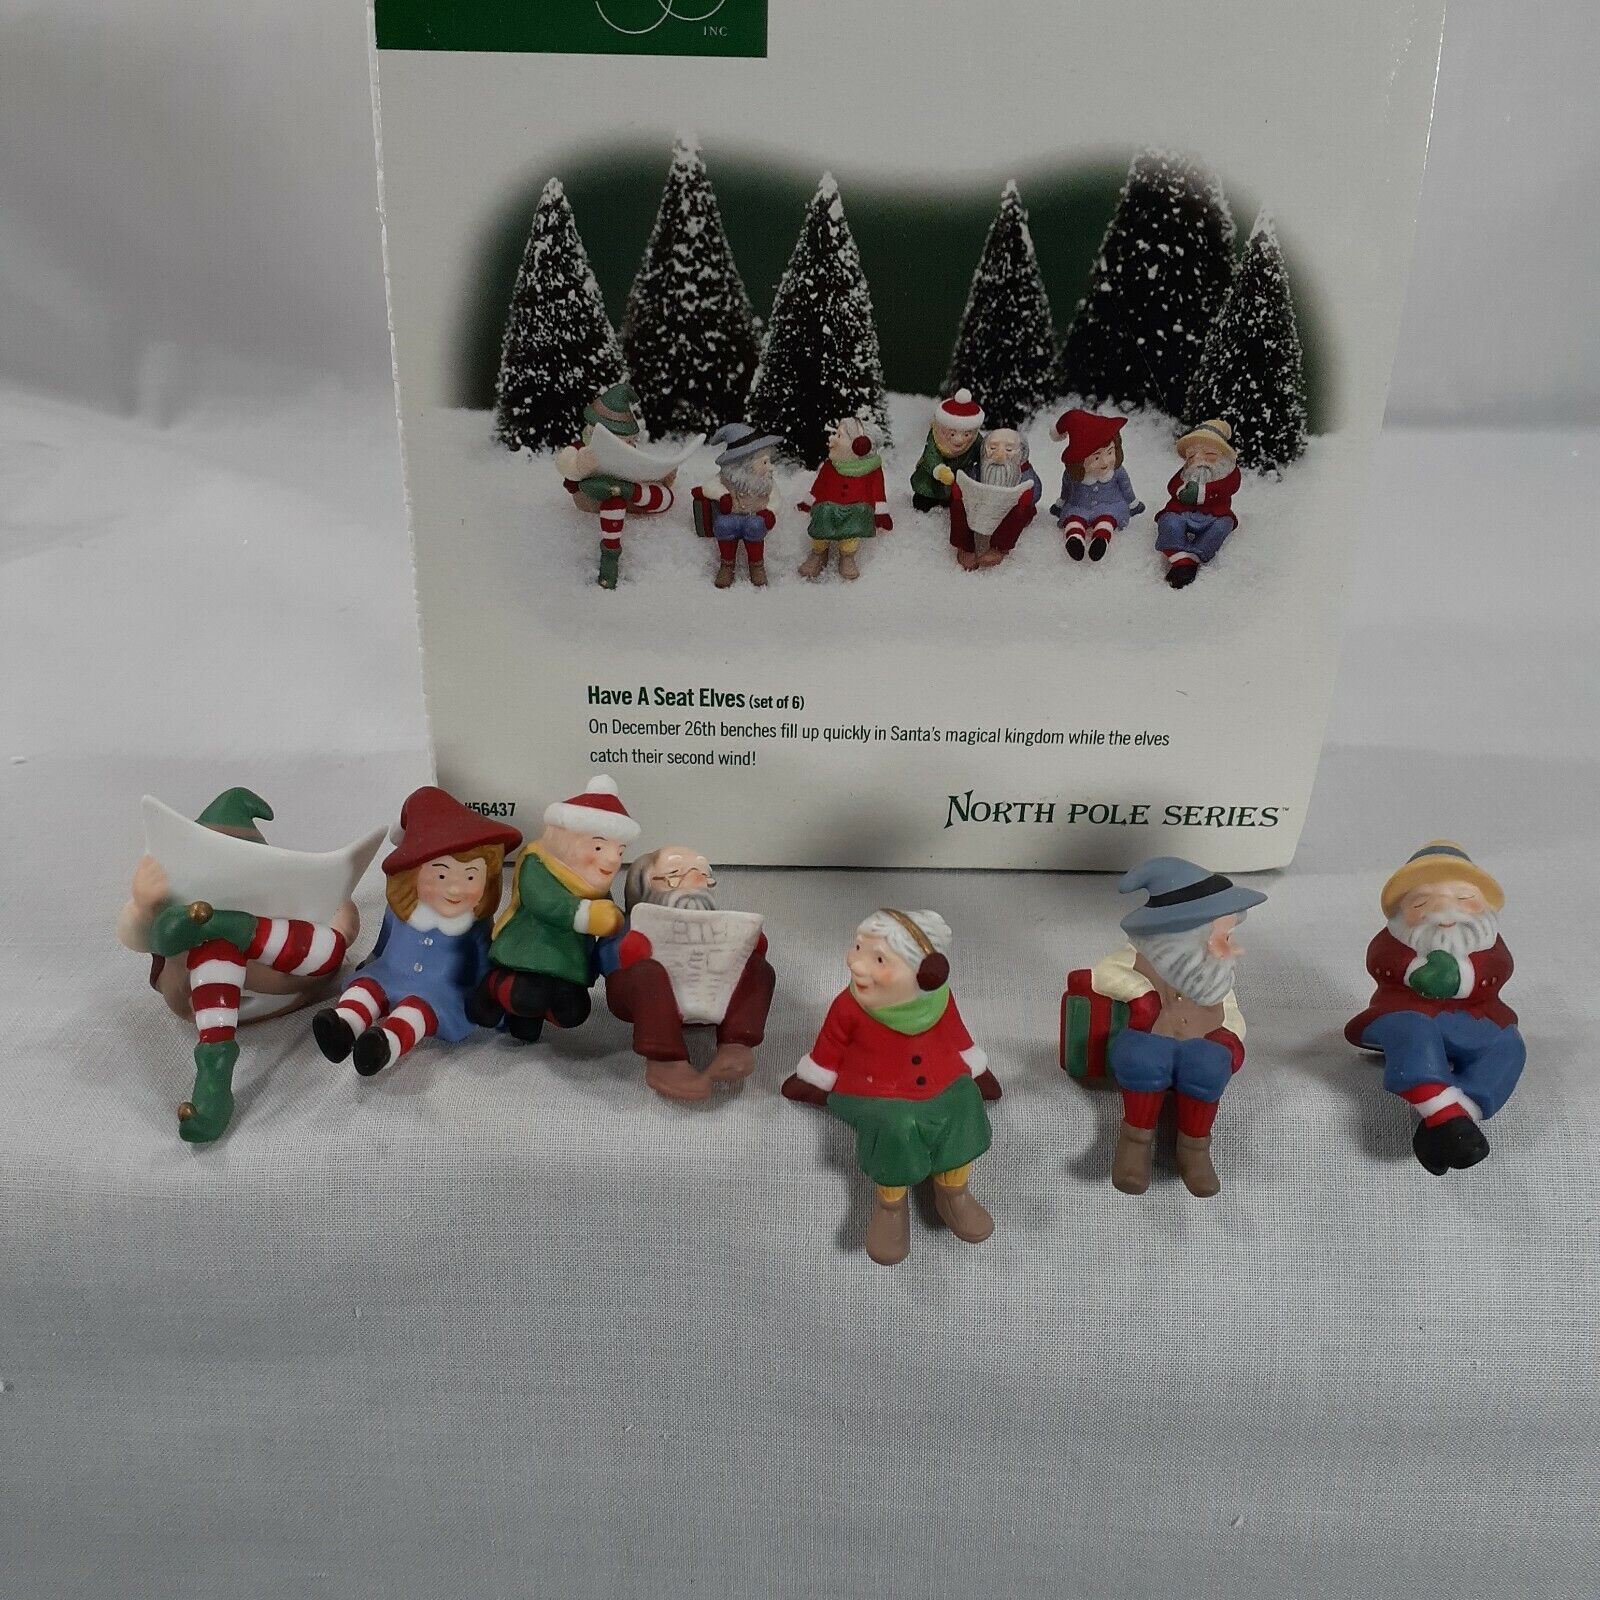 Dept 56 North Pole Series Have A Seat Elves 56437 in original box and Sleeve 